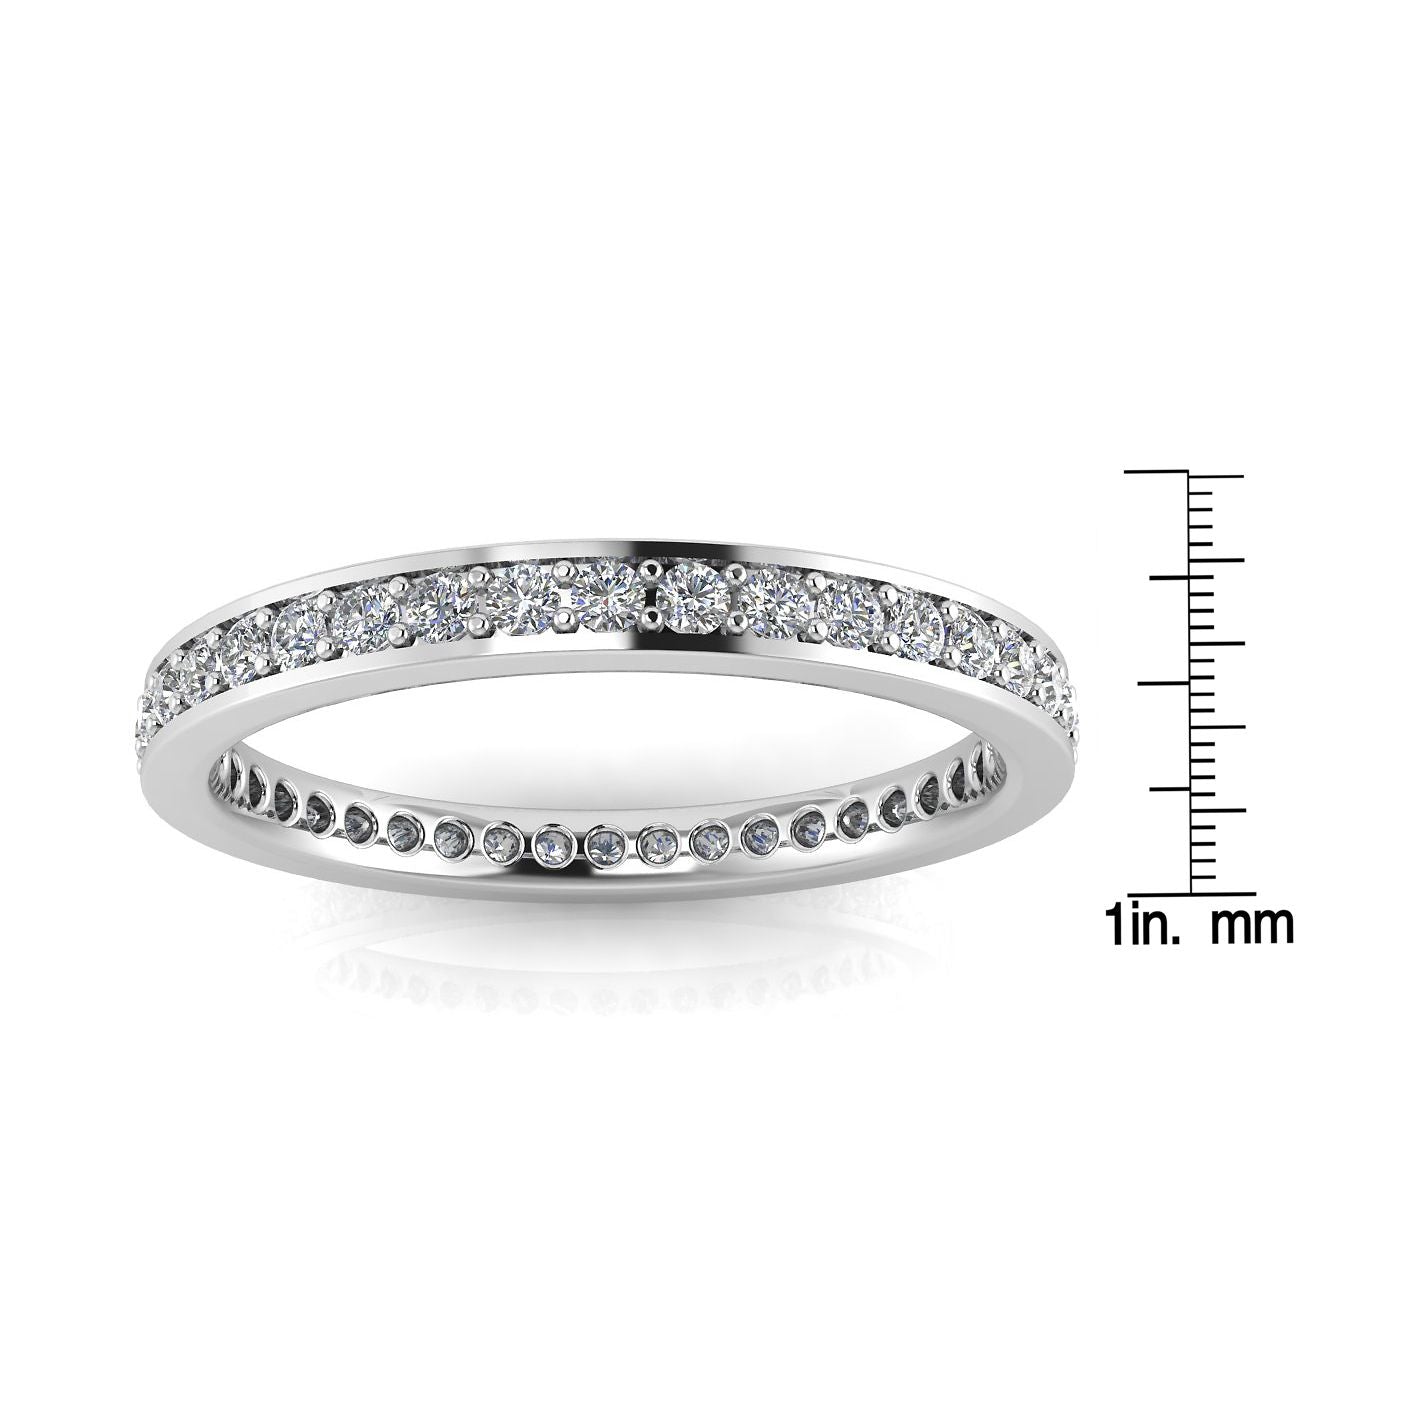 Round Brilliant Cut Diamond Channel Pave Set Eternity Ring In Platinum  (0.66ct. Tw.) Ring Size 5